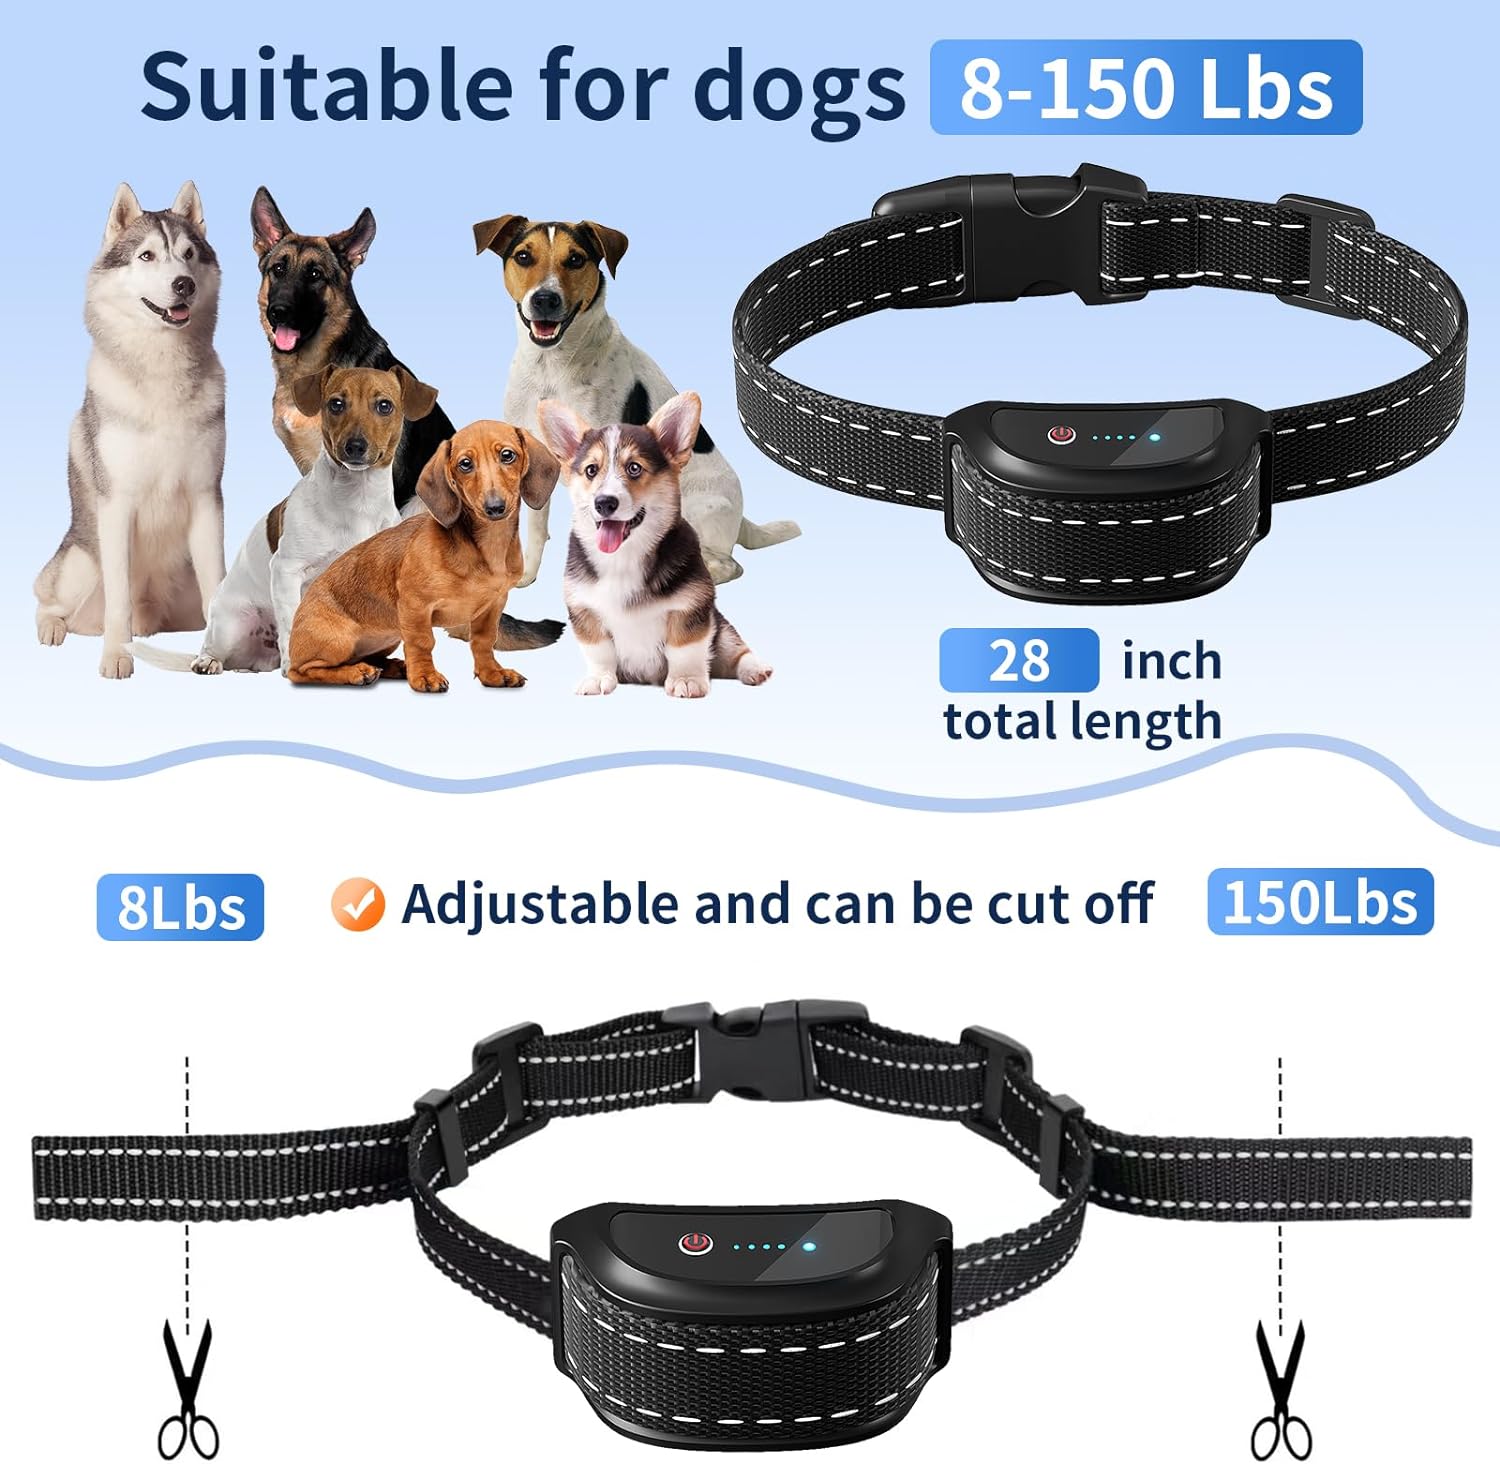 Dog Shock Collar with Remote - Electric Dog Training Collar 1650ft, Rechargeable E-Collar Waterproof Collars with 4 Training Modes and Security Lock for Small Medium Large Dogs (8-150 LBS)